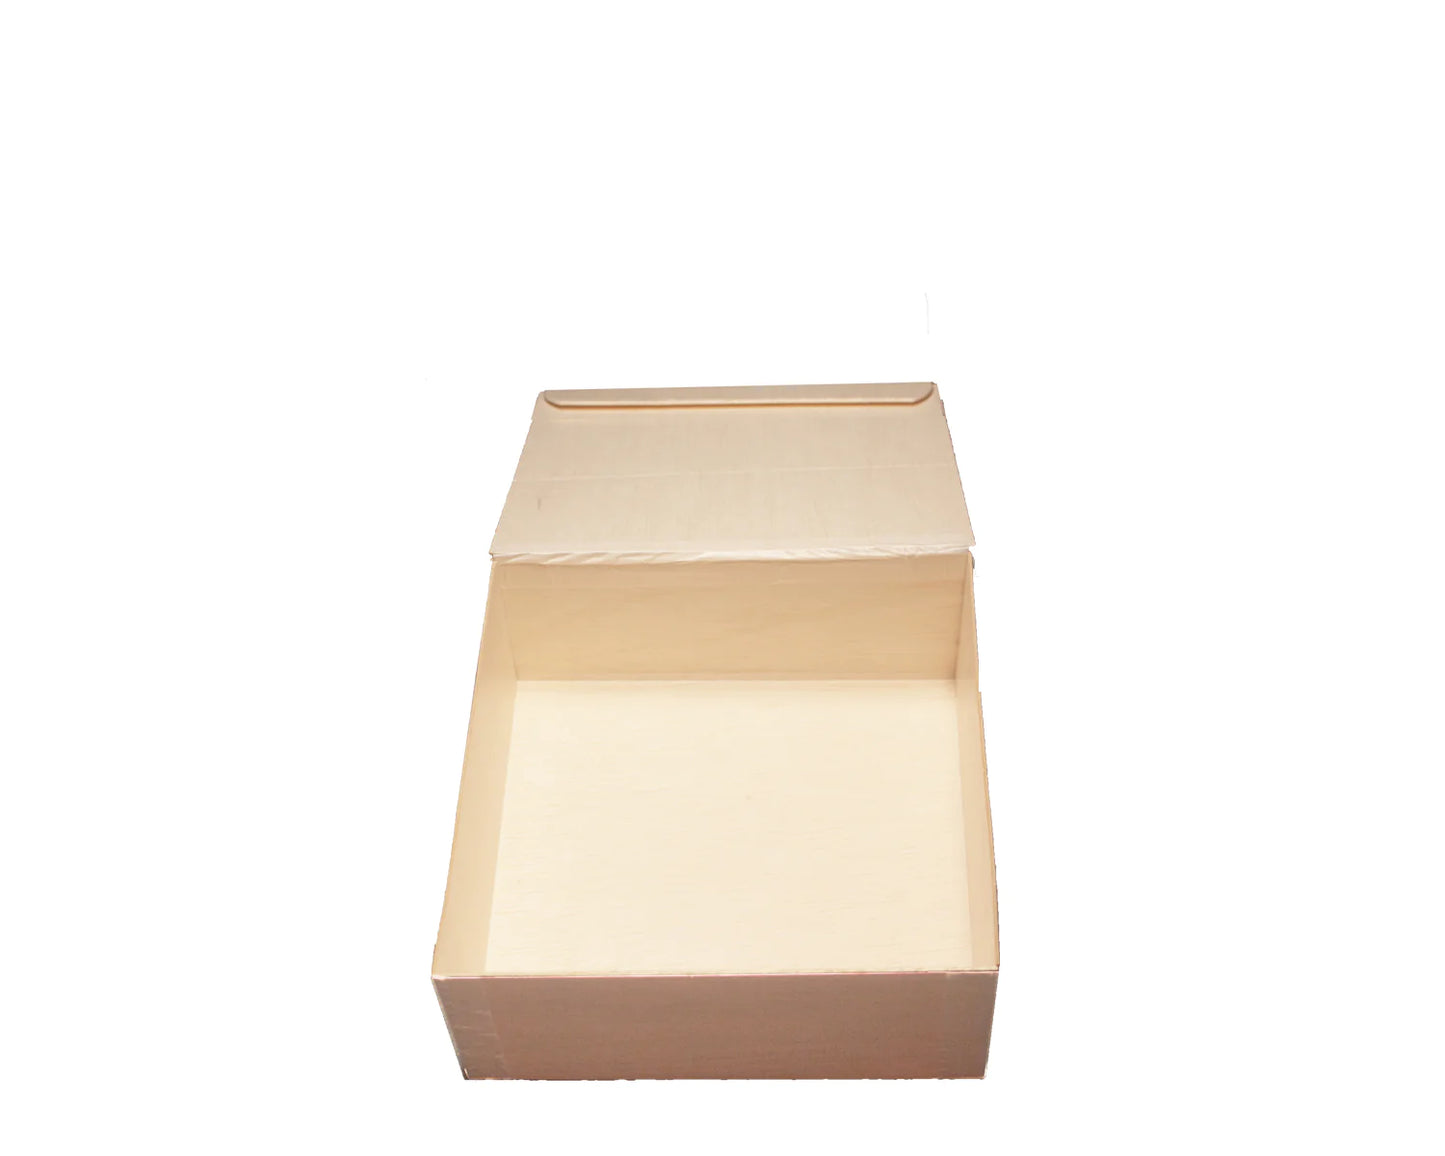 6" x 6" Collapsible Food Boxes with Lid | 9 oz | Square